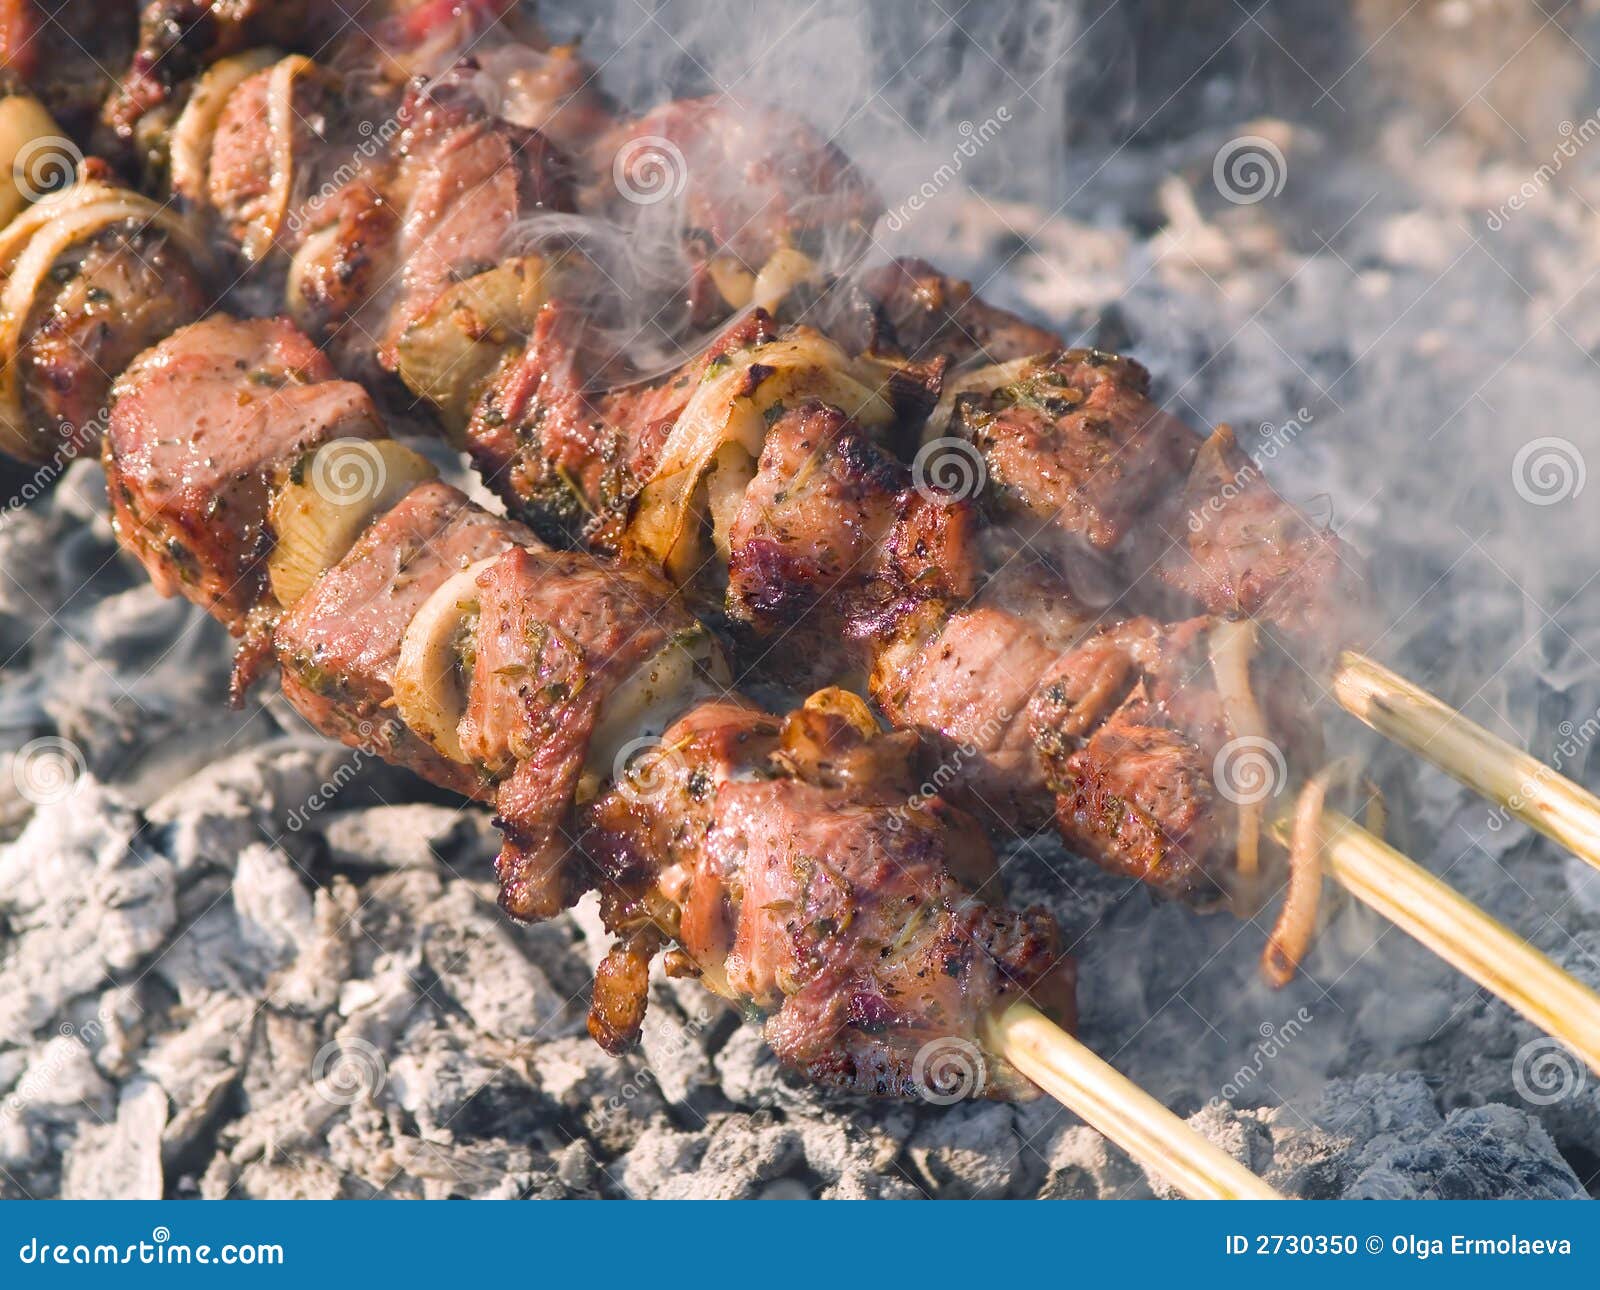 Kebabs cooking on the gril stock photo. Image of green - 2730350